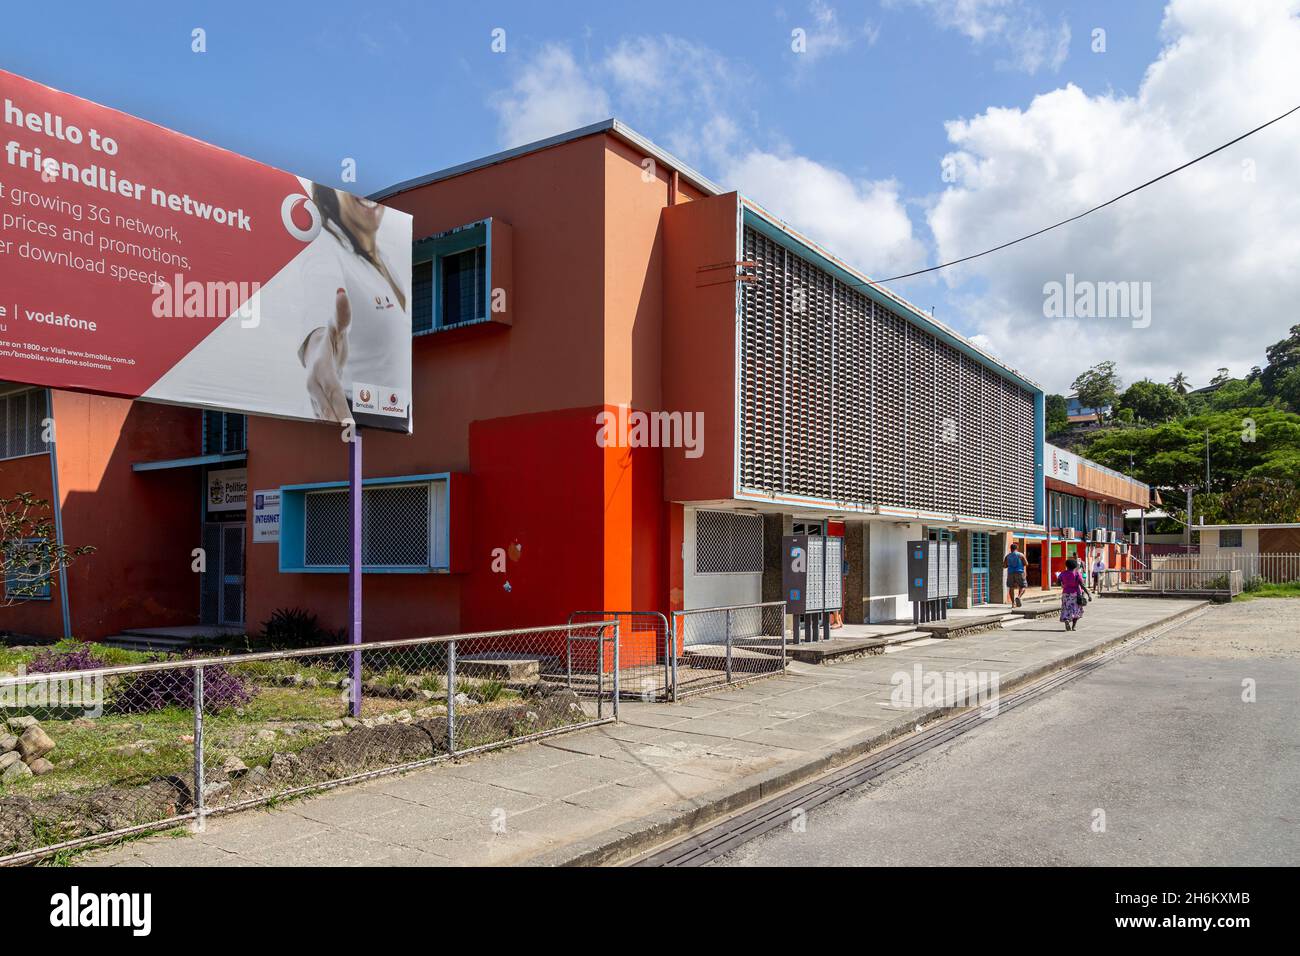 HONIARA, SOLOMON ISLANDS - Jan 11, 2016: People in front of the main entry doors of Honiara General Post Office in Honiara, the capital city of the So Stock Photo